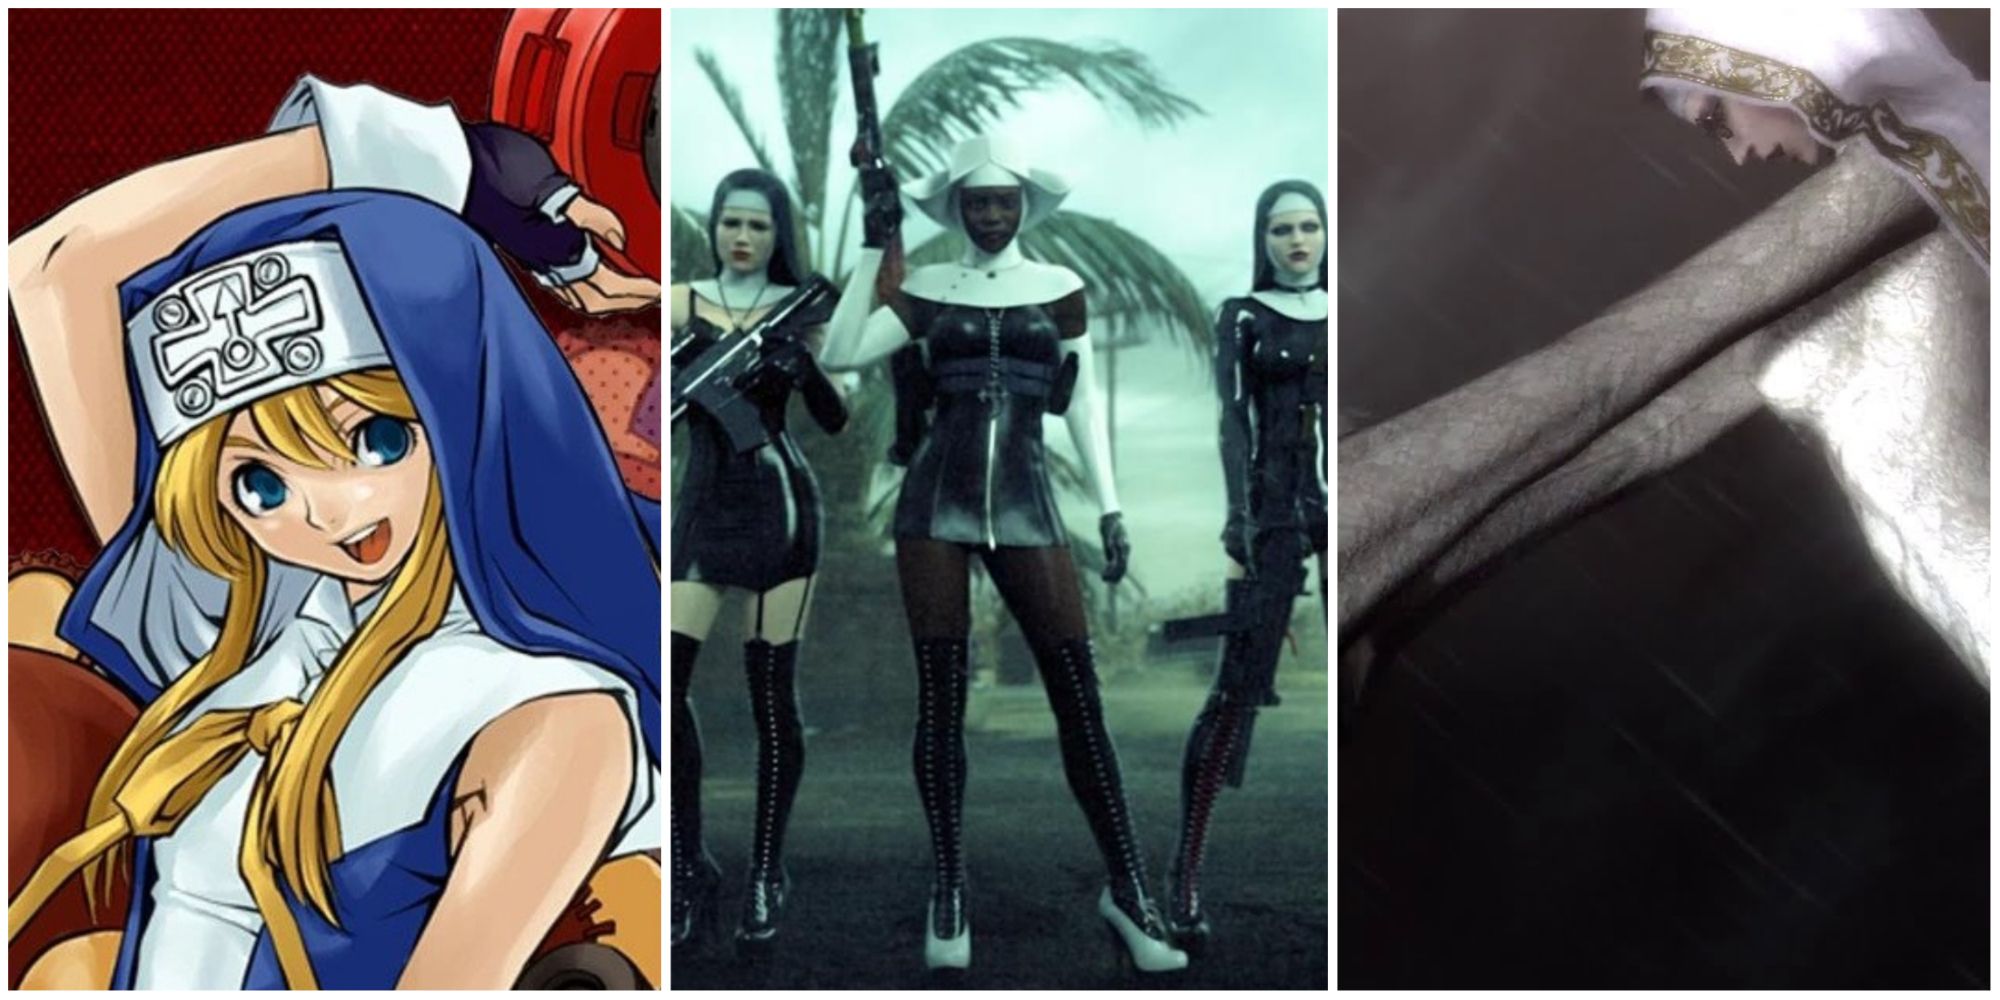 Bridget from Guilty Gear with a yo-yo above their head, three of The Saints from Hitman Absolution standing together, Bayonetta dressed as a nun with her arms outstretched, left to right